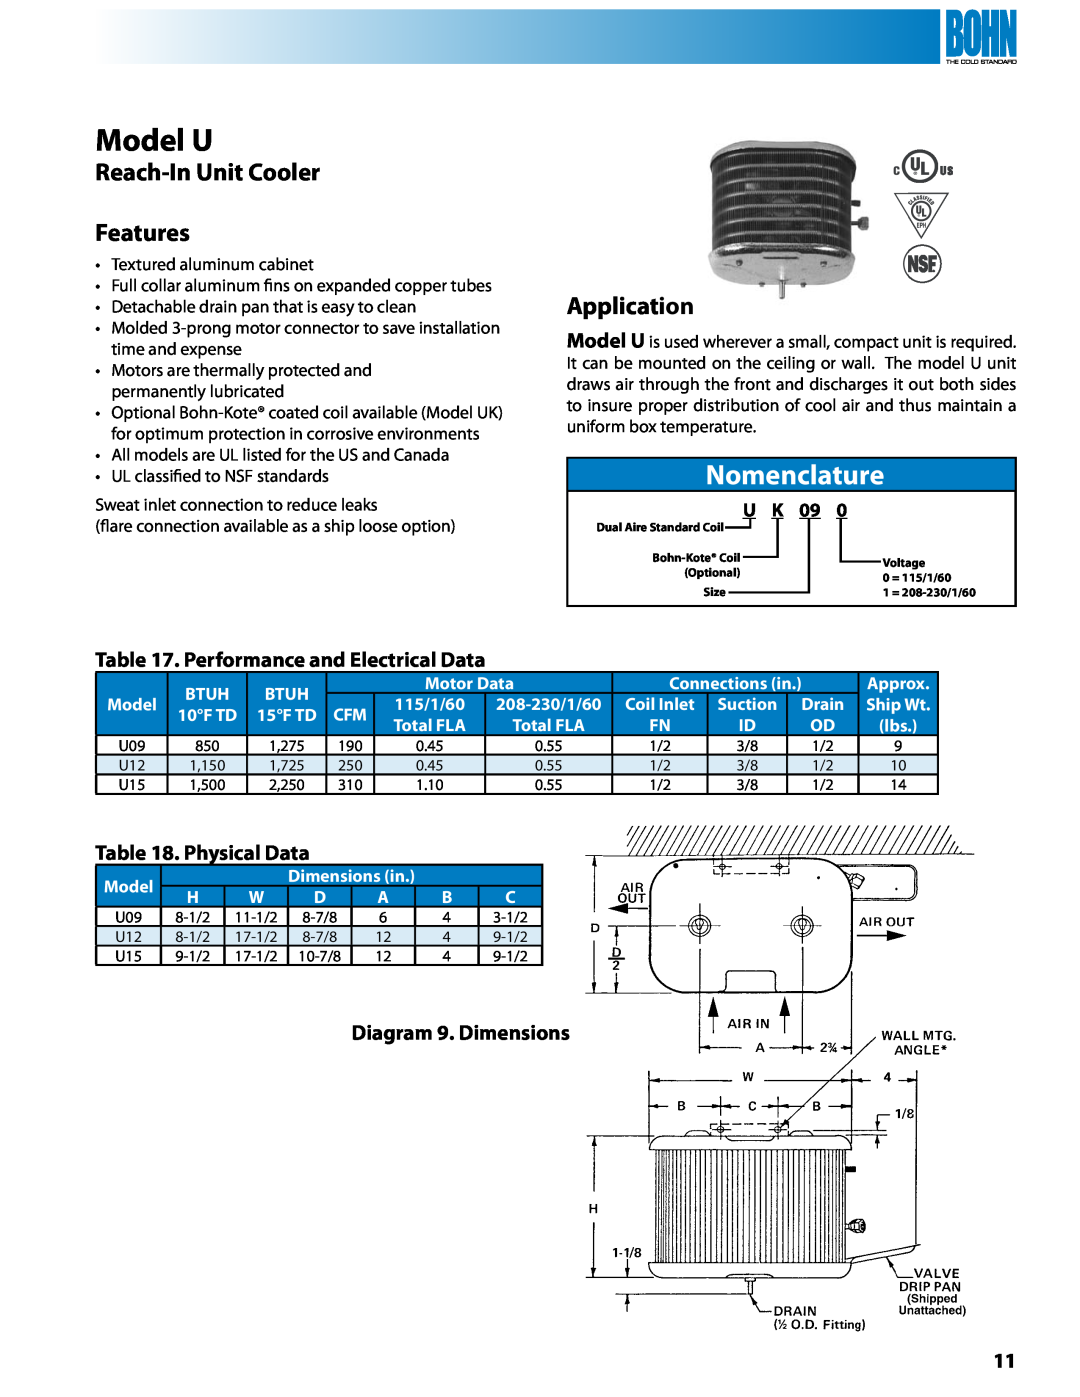 Heatcraft Refrigeration Products TA Model U, Reach-InUnit Cooler Features, Performance and Electrical Data, Physical Data 